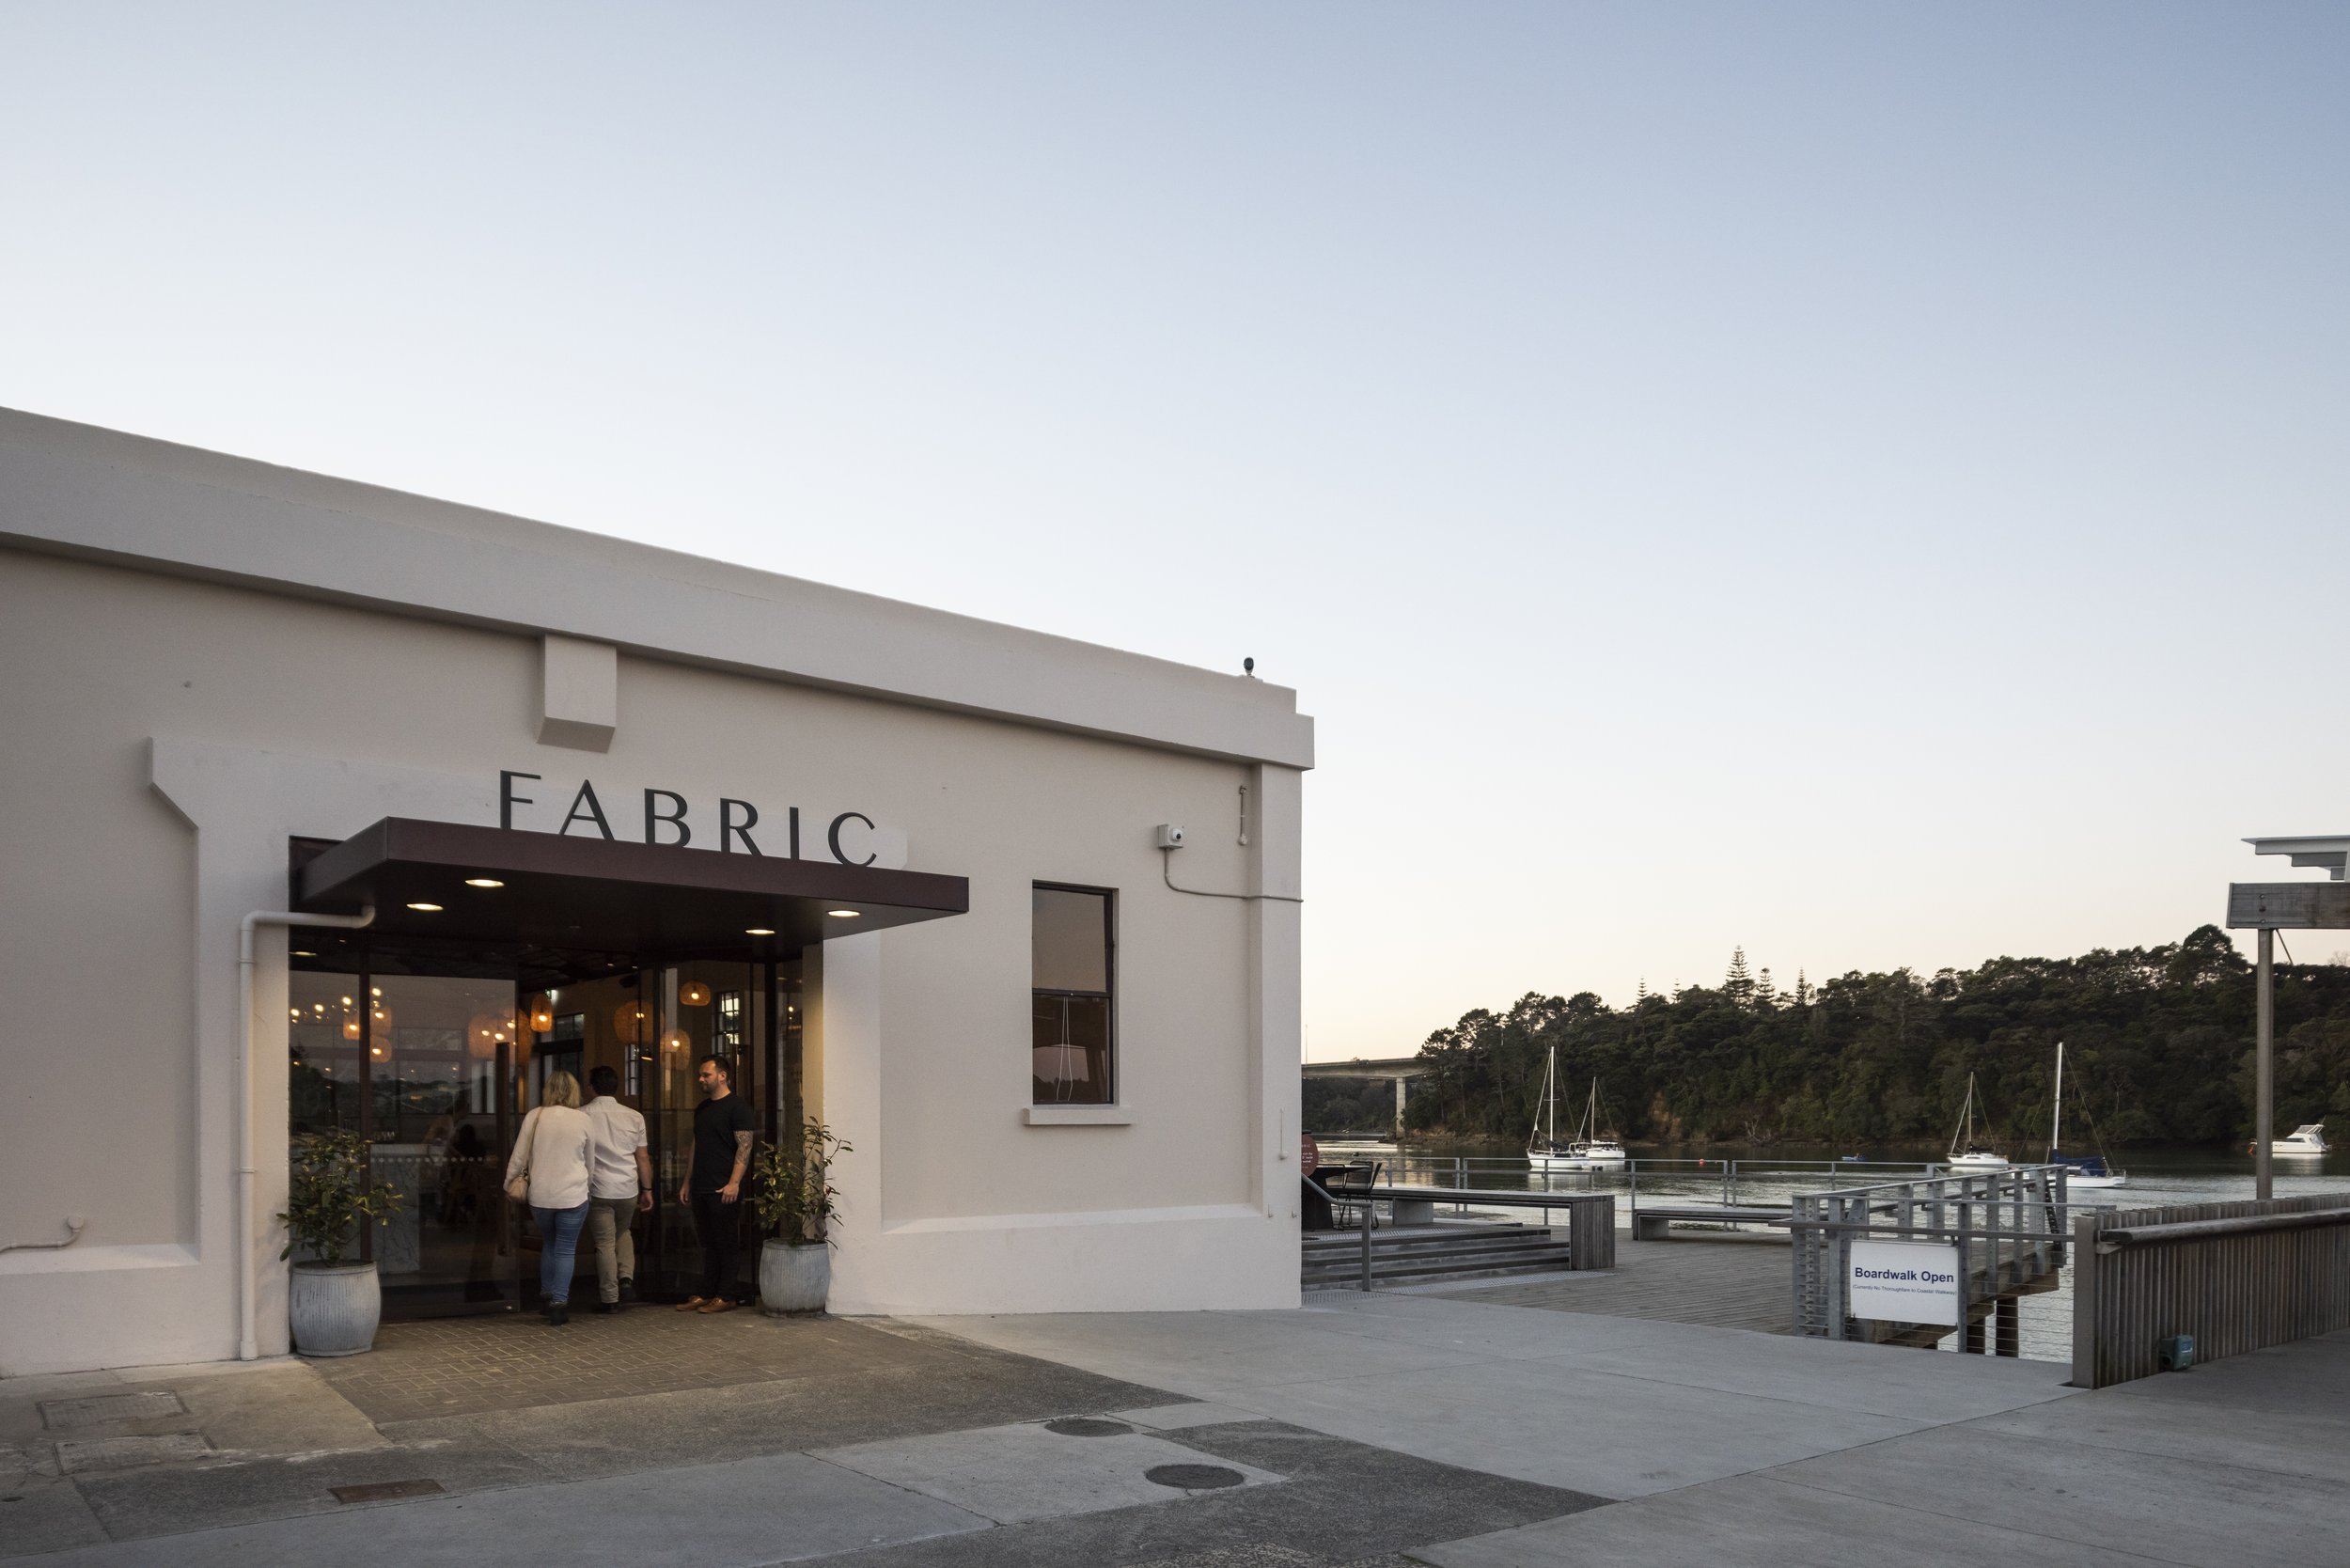 Fabric Cafe Bistro, Hobsonville Point – Love.Life.Daley